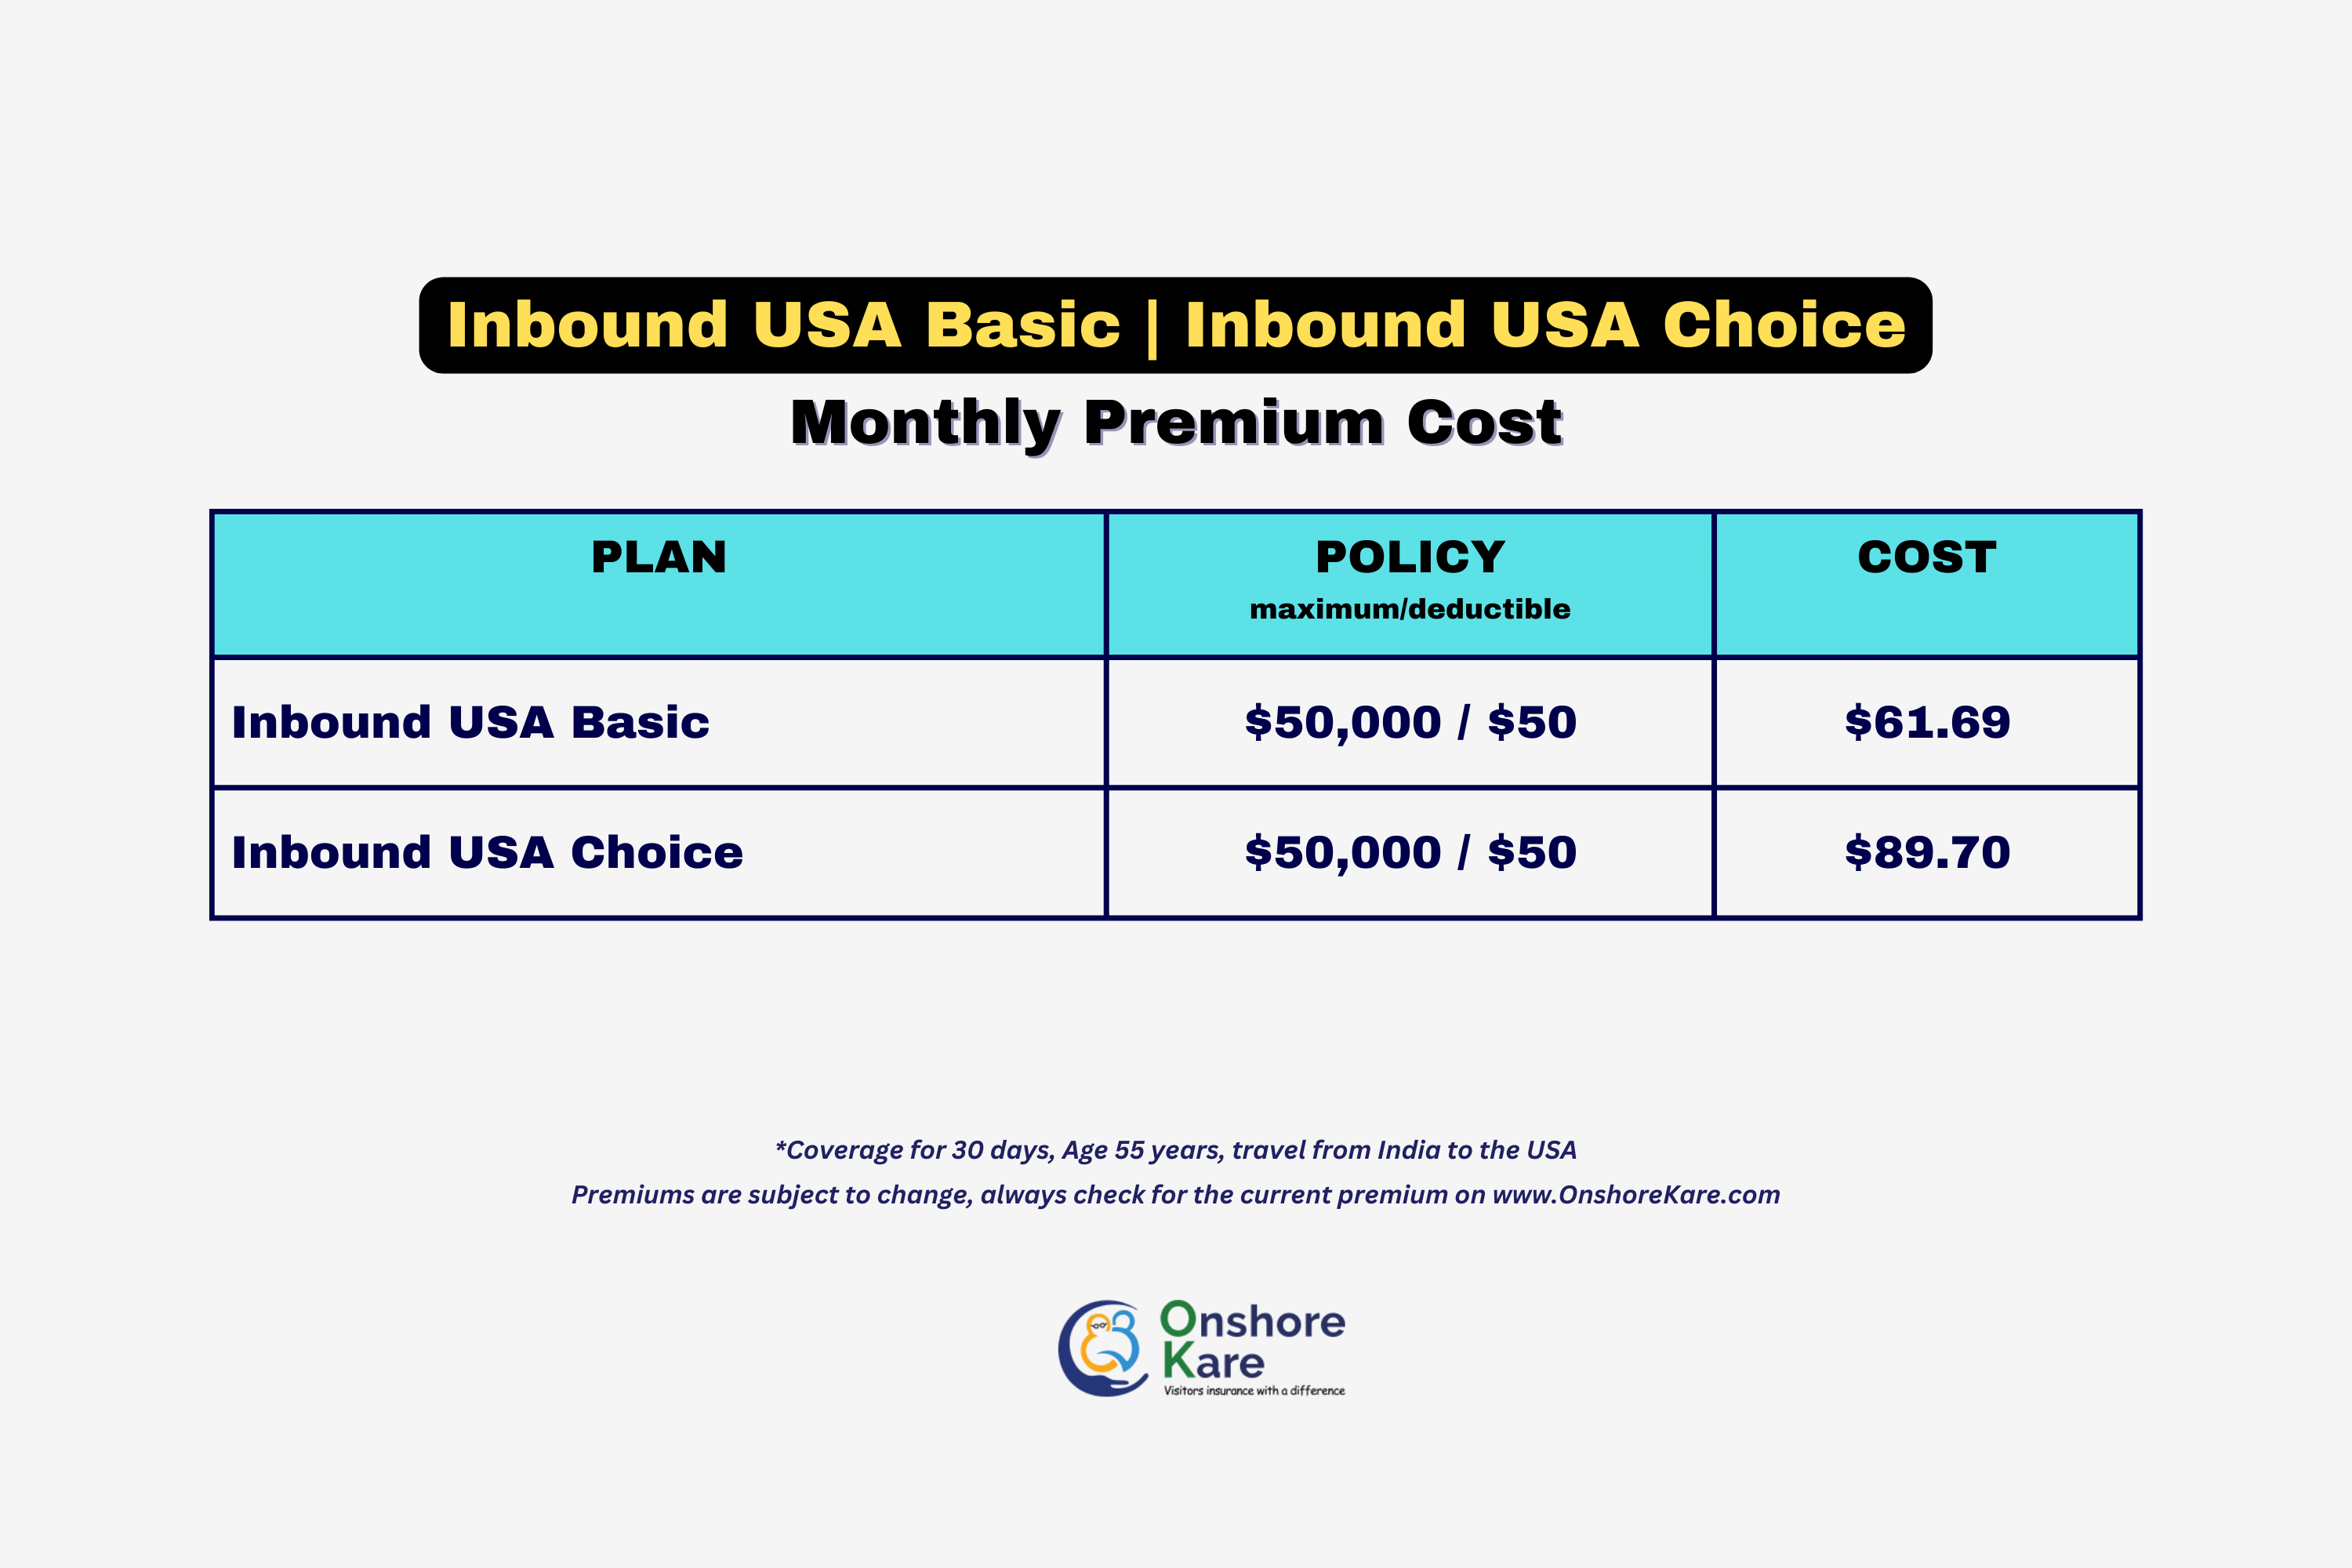 Complete guide to Inbound USA insurance